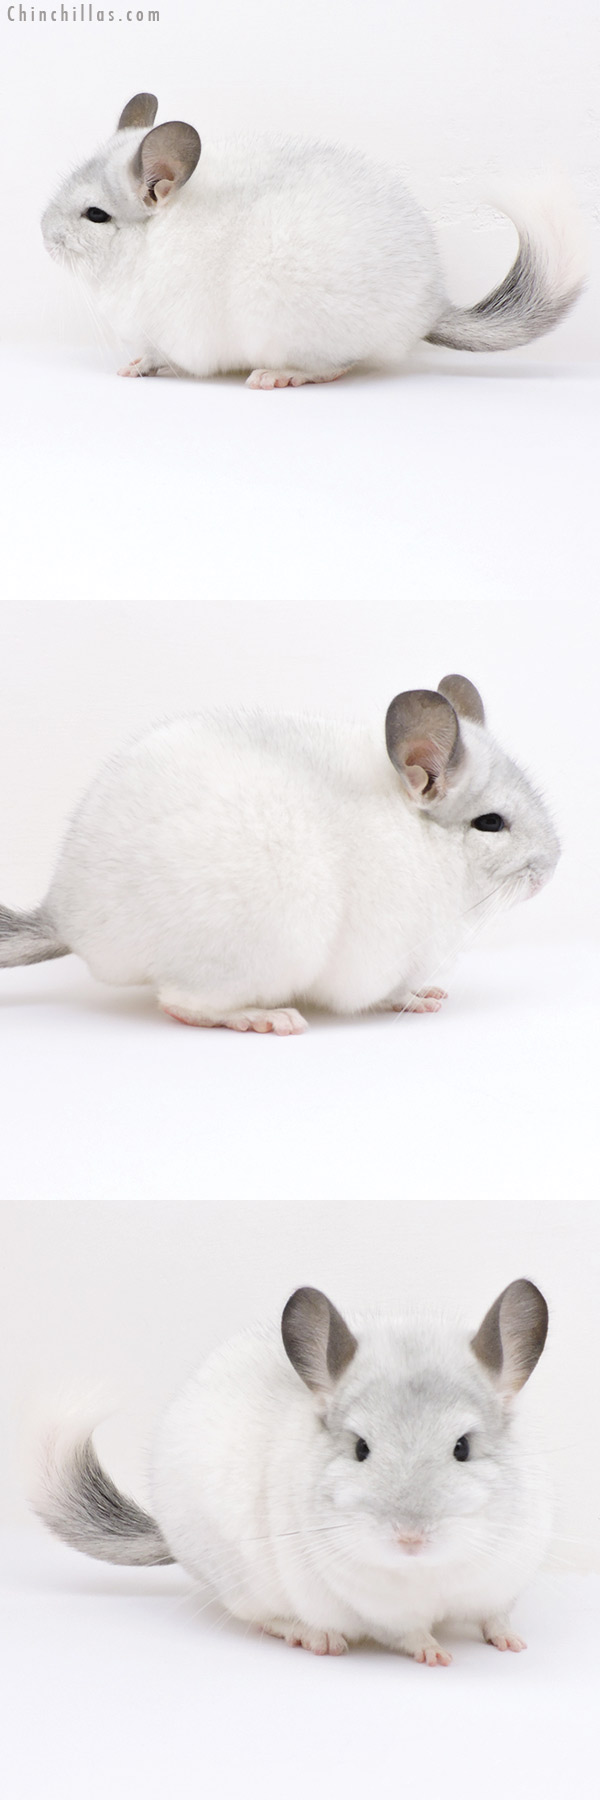 Chinchilla or related item offered for sale or export on Chinchillas.com - 18286 Premium Production Quality White Mosaic Female Chinchilla